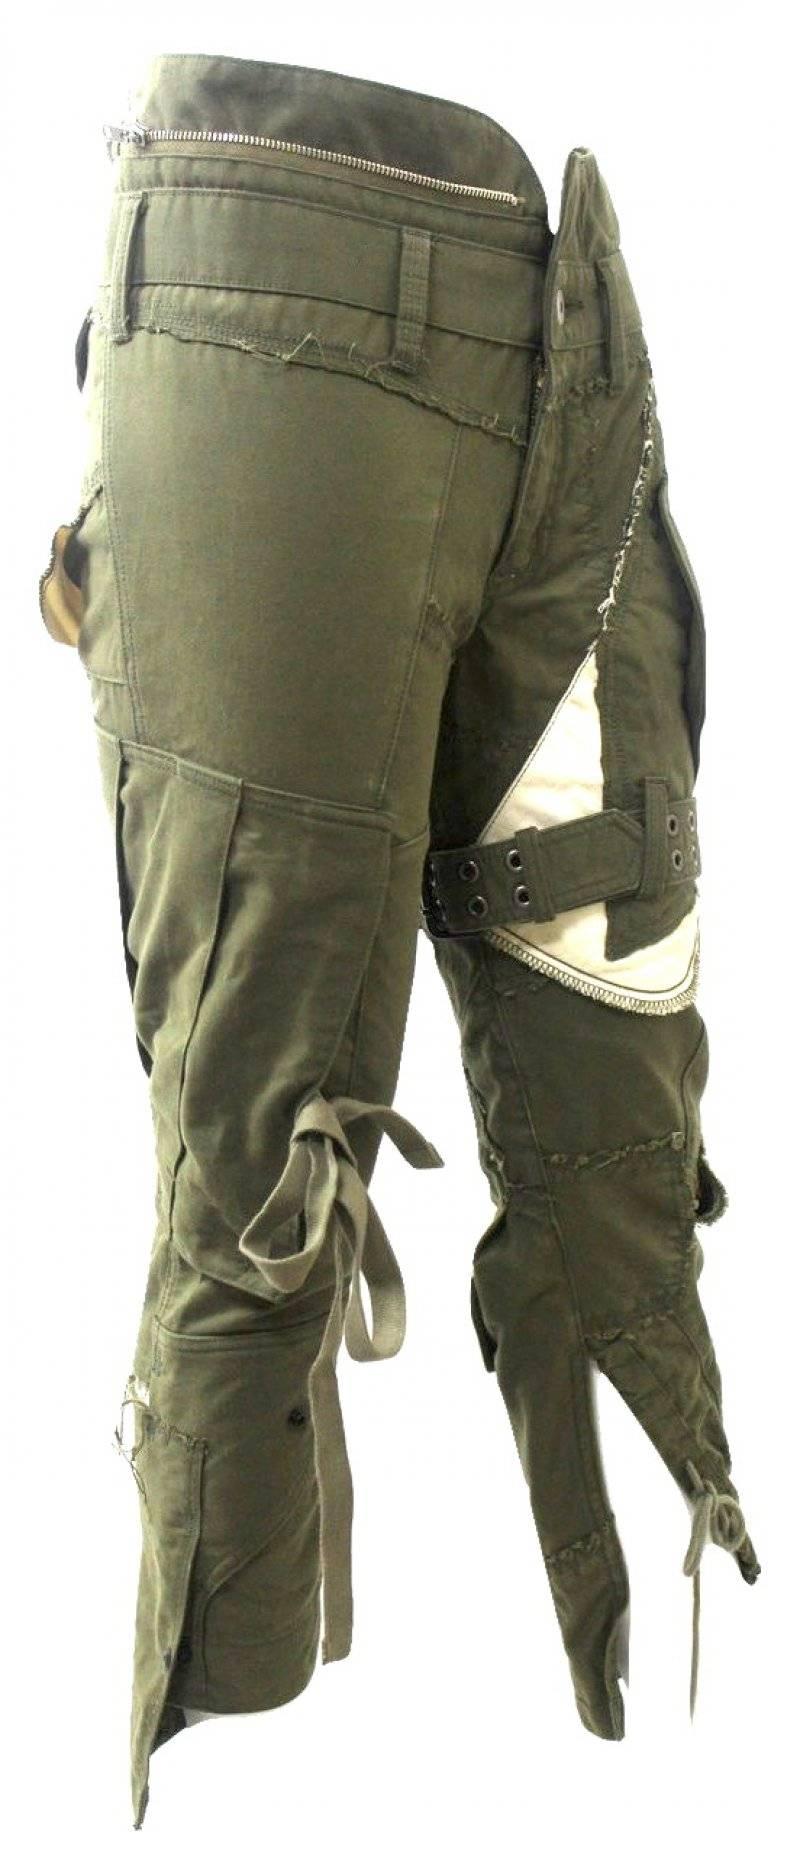 Junya watanabe Military Collection Cargo Pants
Labelled size SS
Excellent condition 
